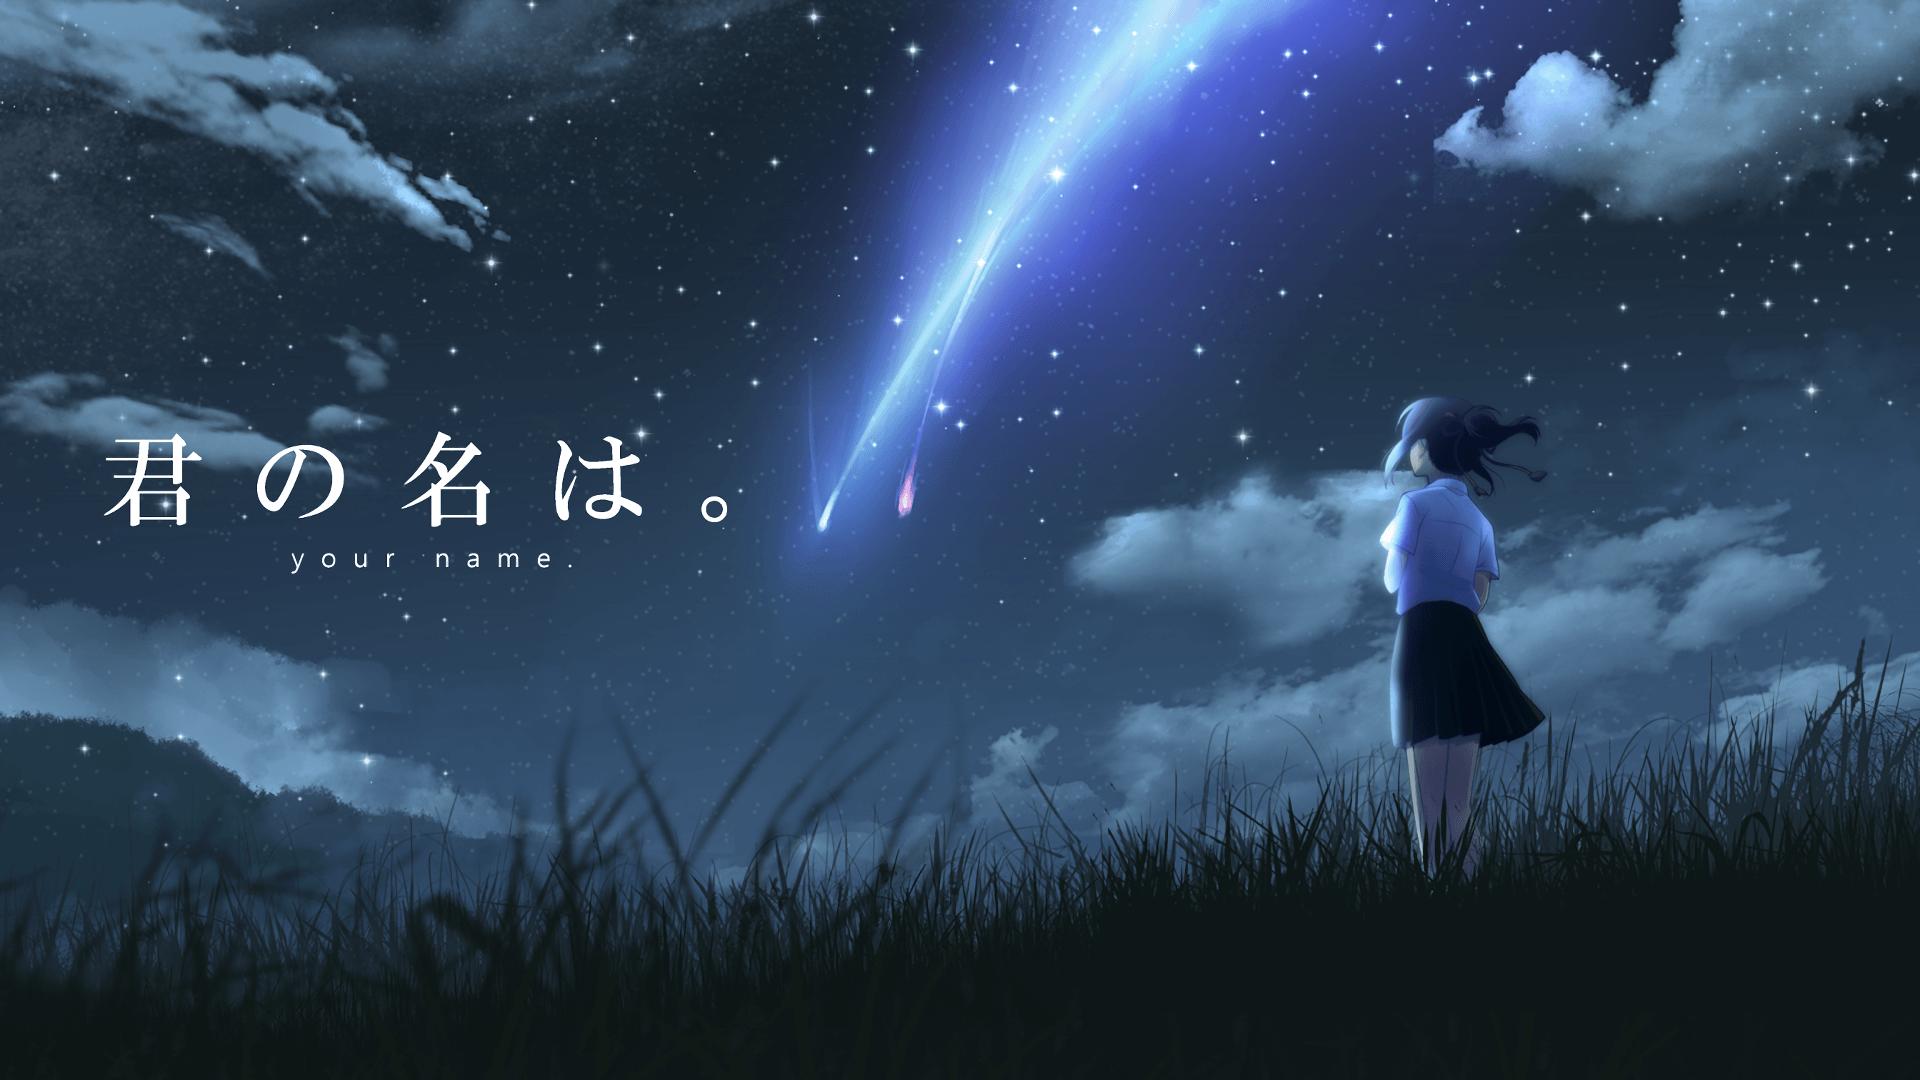 Your Name Wallpaper For Pc, your name, Anime